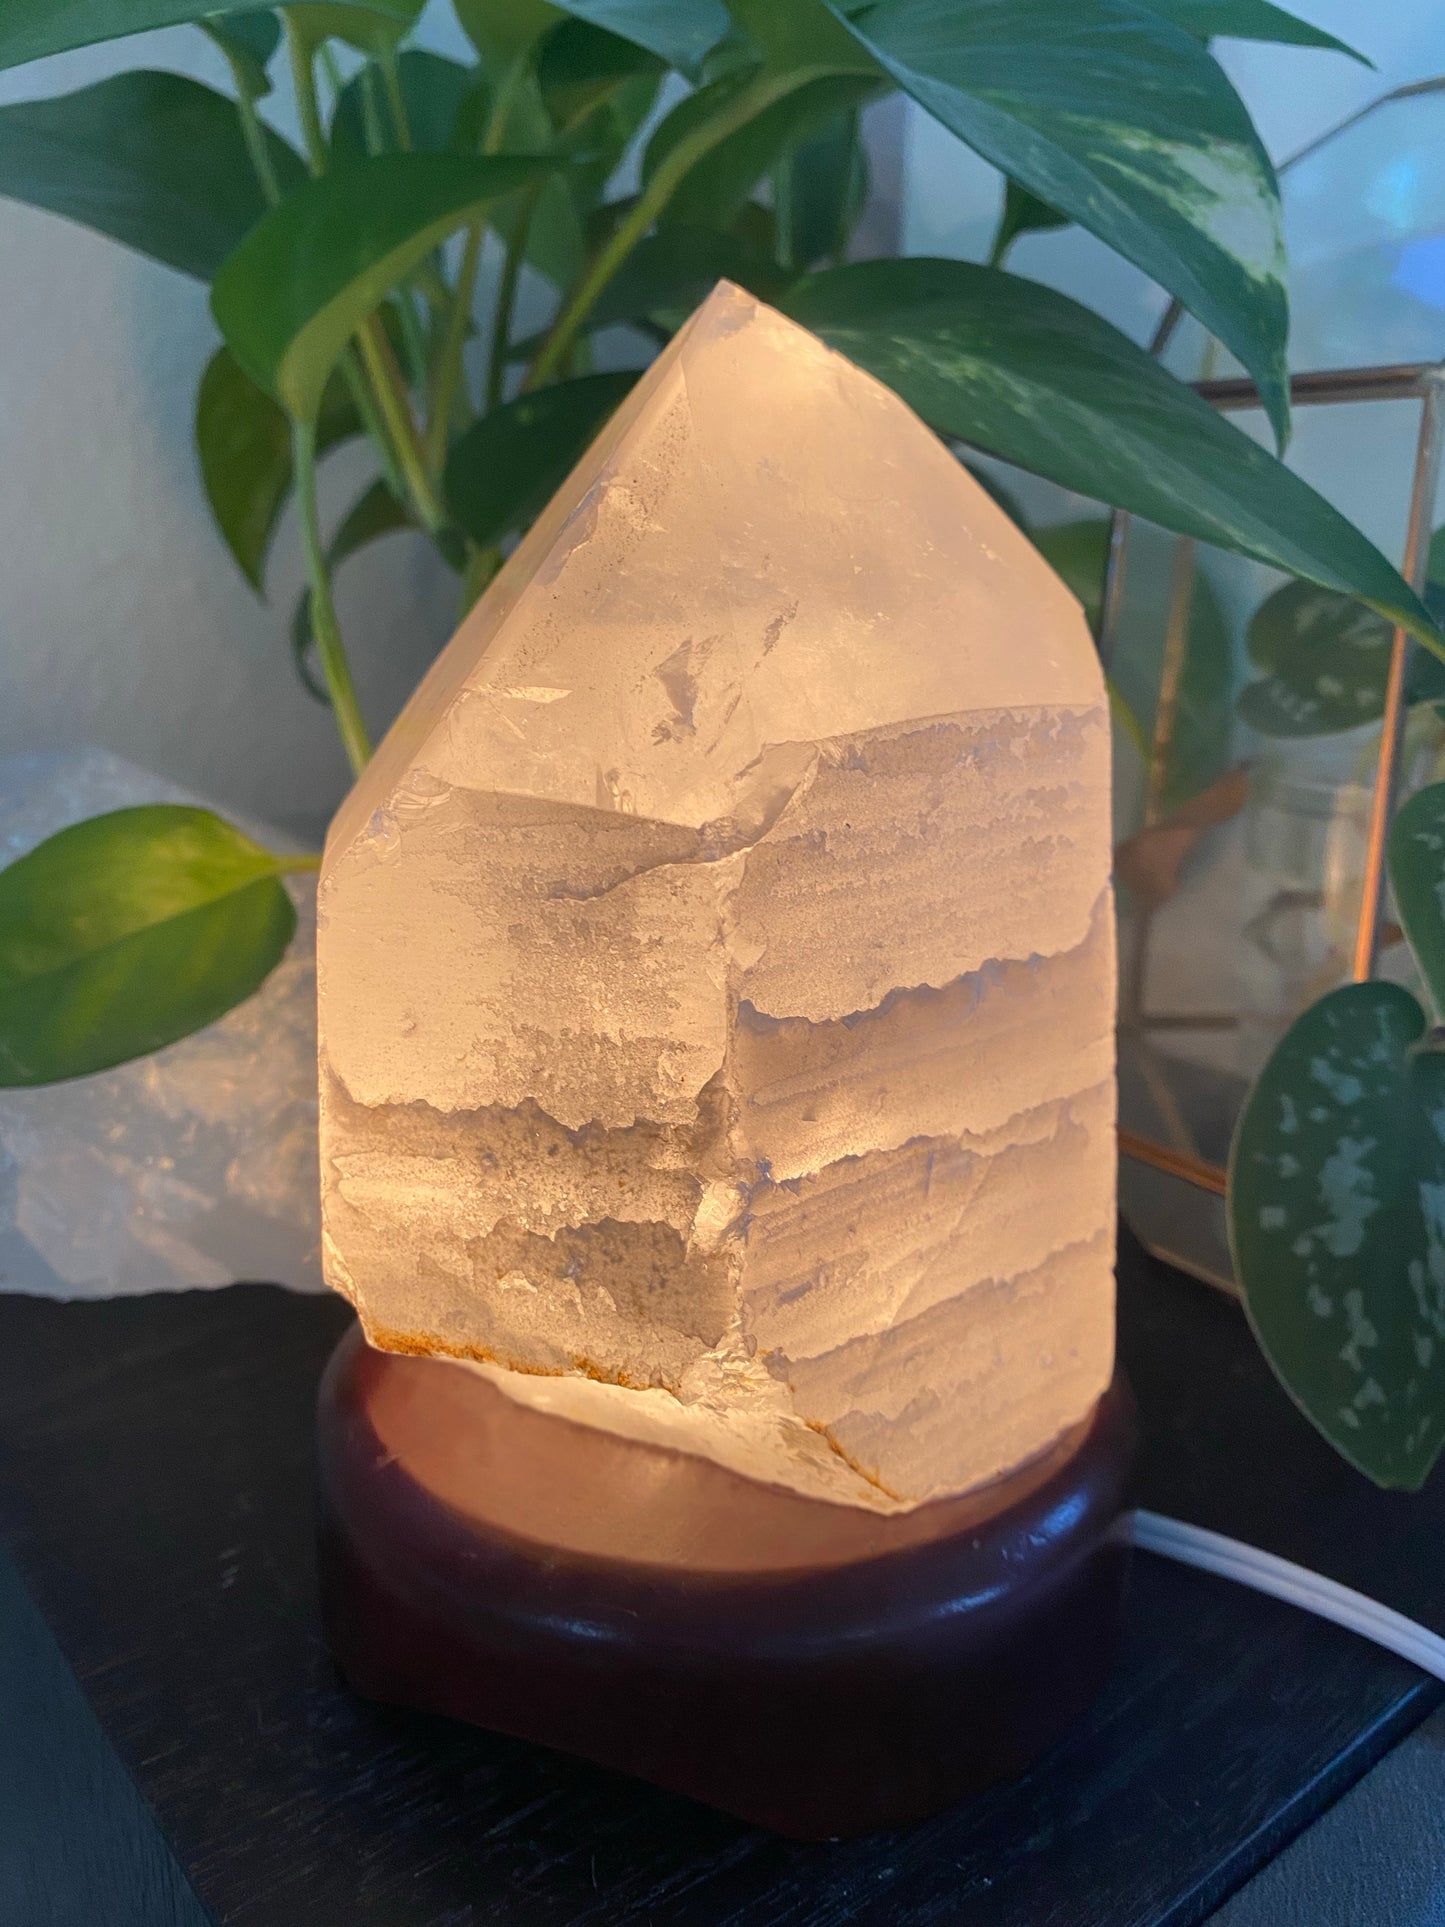 Smokey, Rose and Clear Quartz Lamps